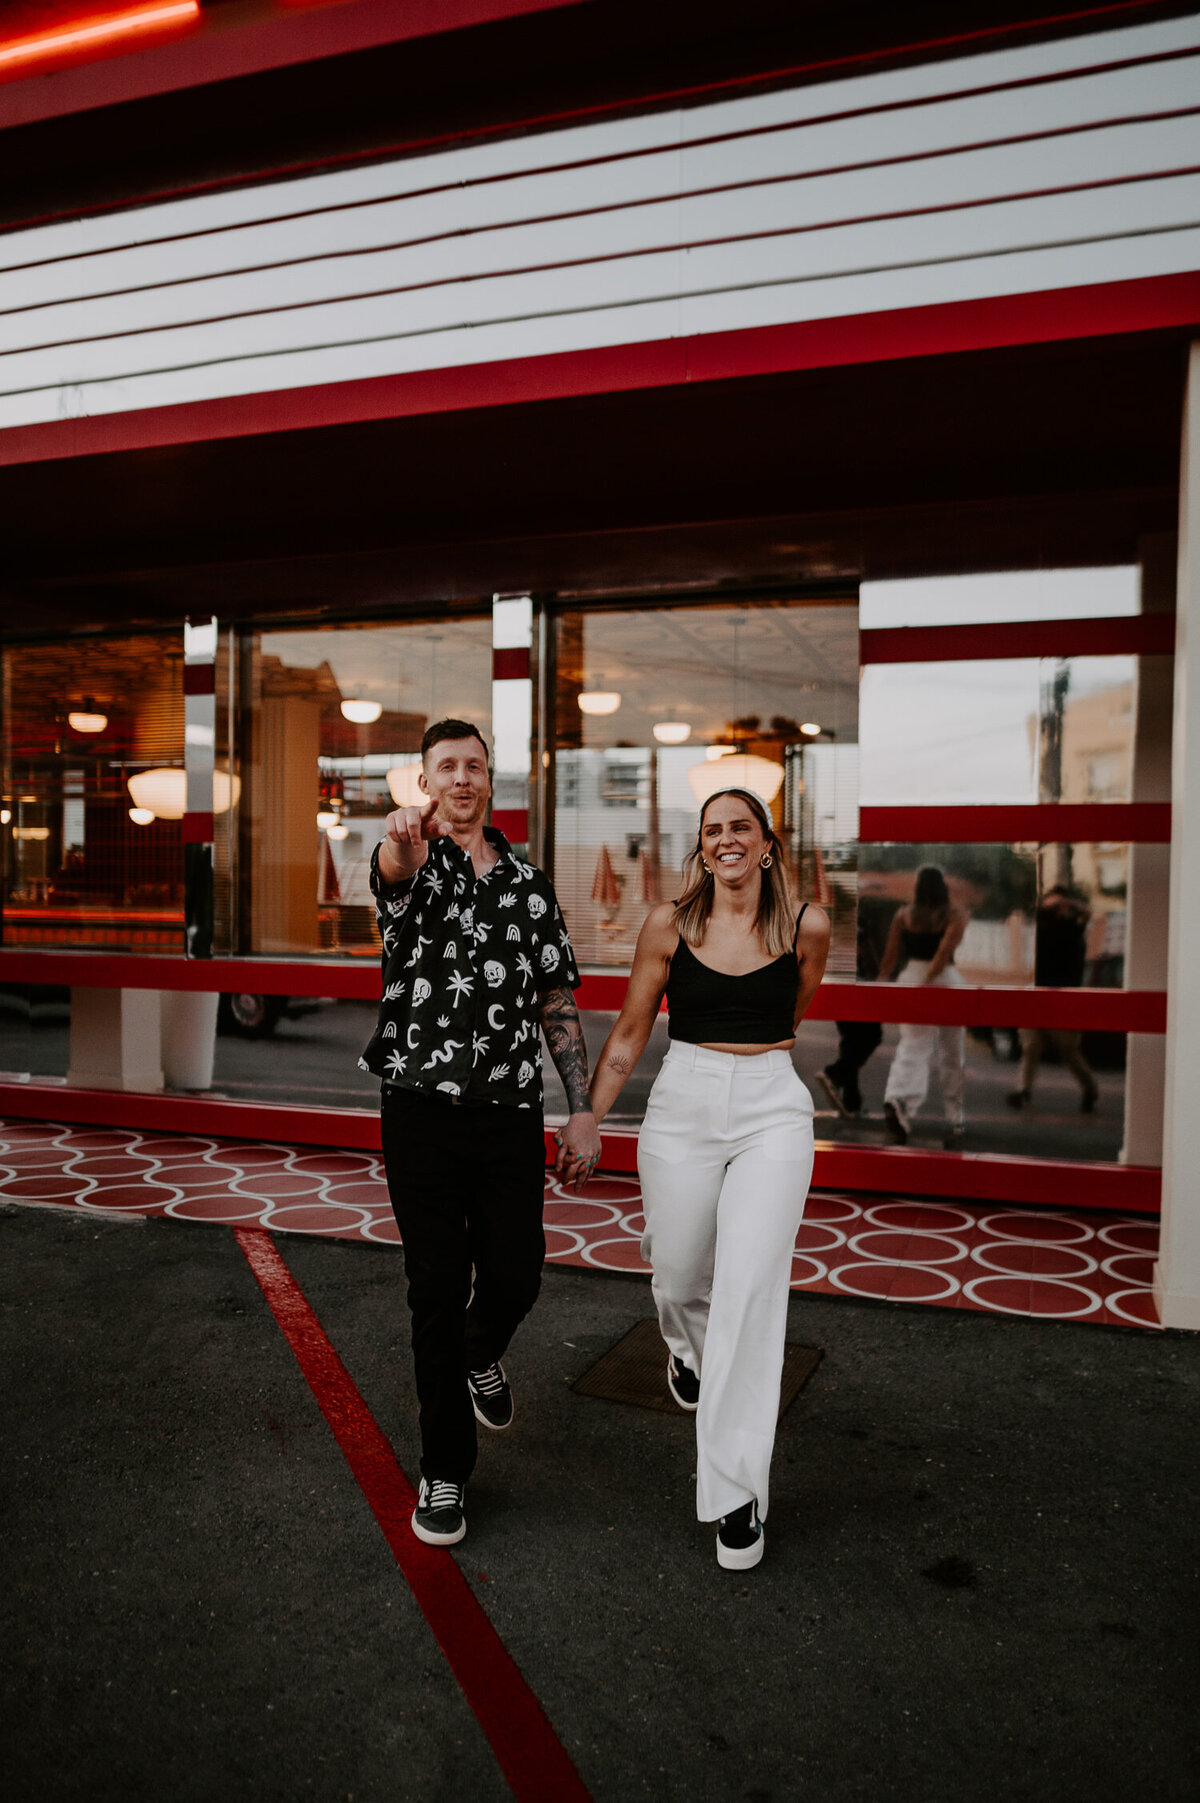 A couple walk towards the camera outside Romeos' Motel and Diner in Ibiza. The Diner has a Las Vegas style vibe.